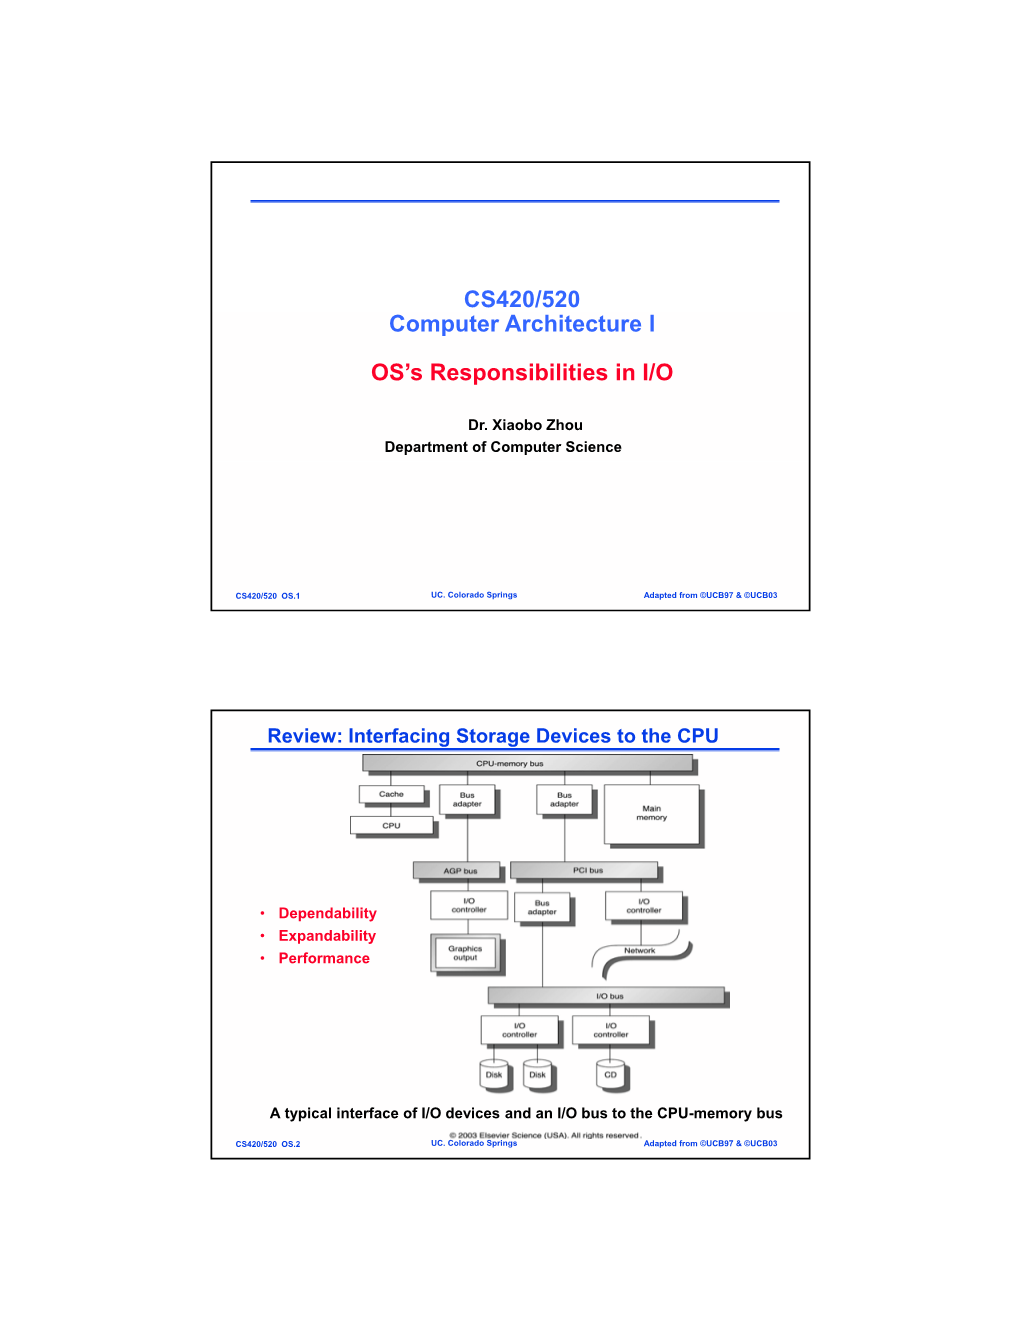 CS420/520 Computer Architecture I OS's Responsibilities In